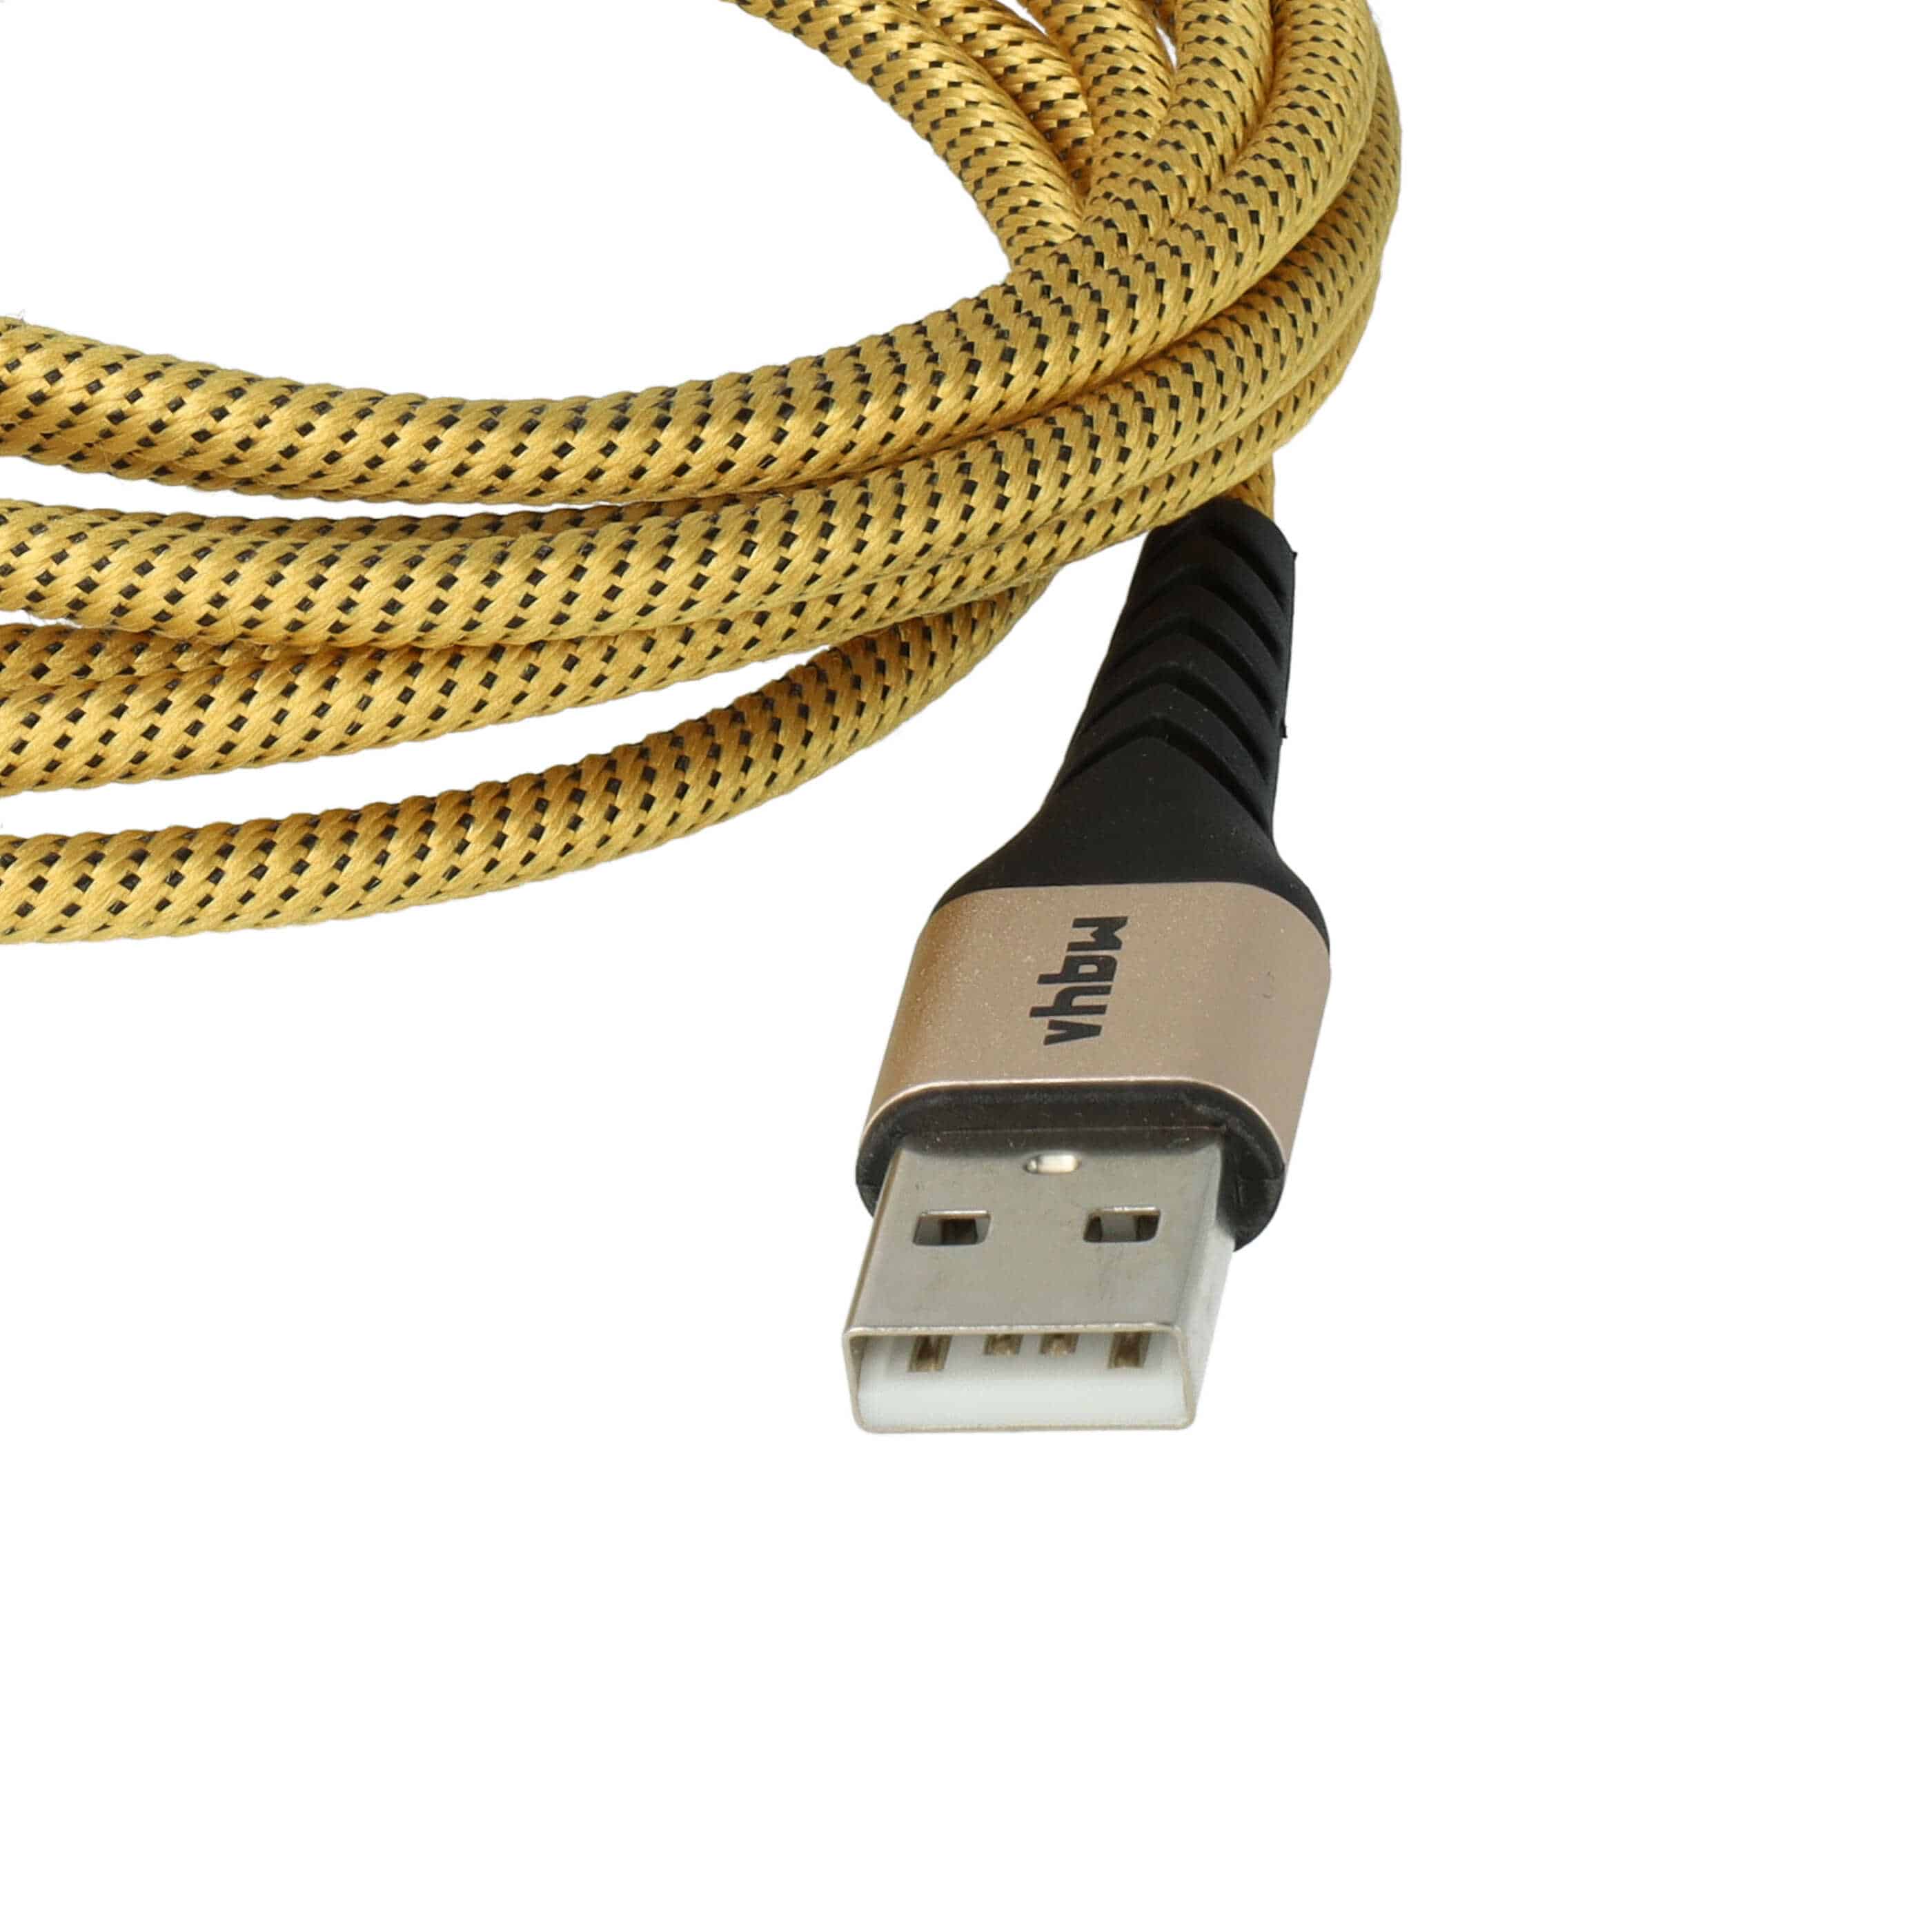 2x Cable Lightning to USB A suitable for 1.Generation iOS Device - yellow/black, 180cm